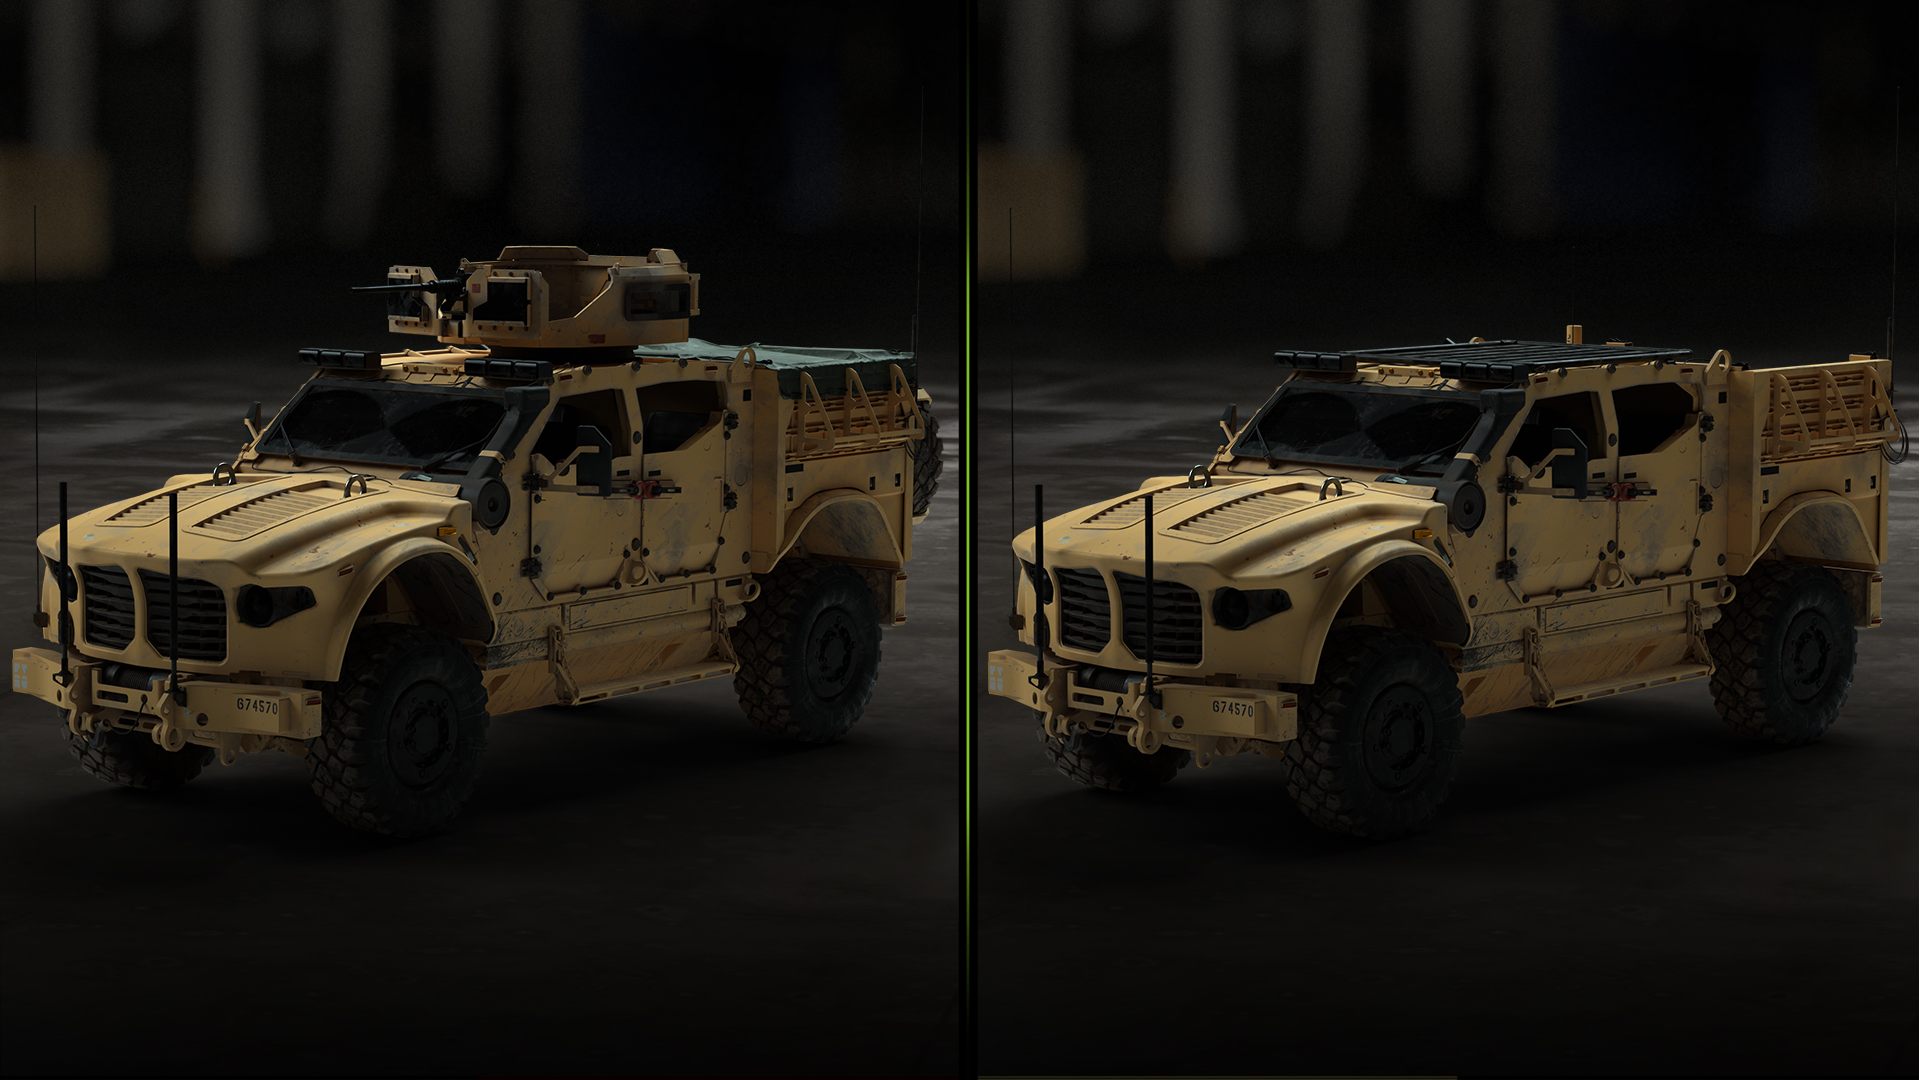 Modern Warfare 2 Vehicles: both versions of the TAC-V can be seen